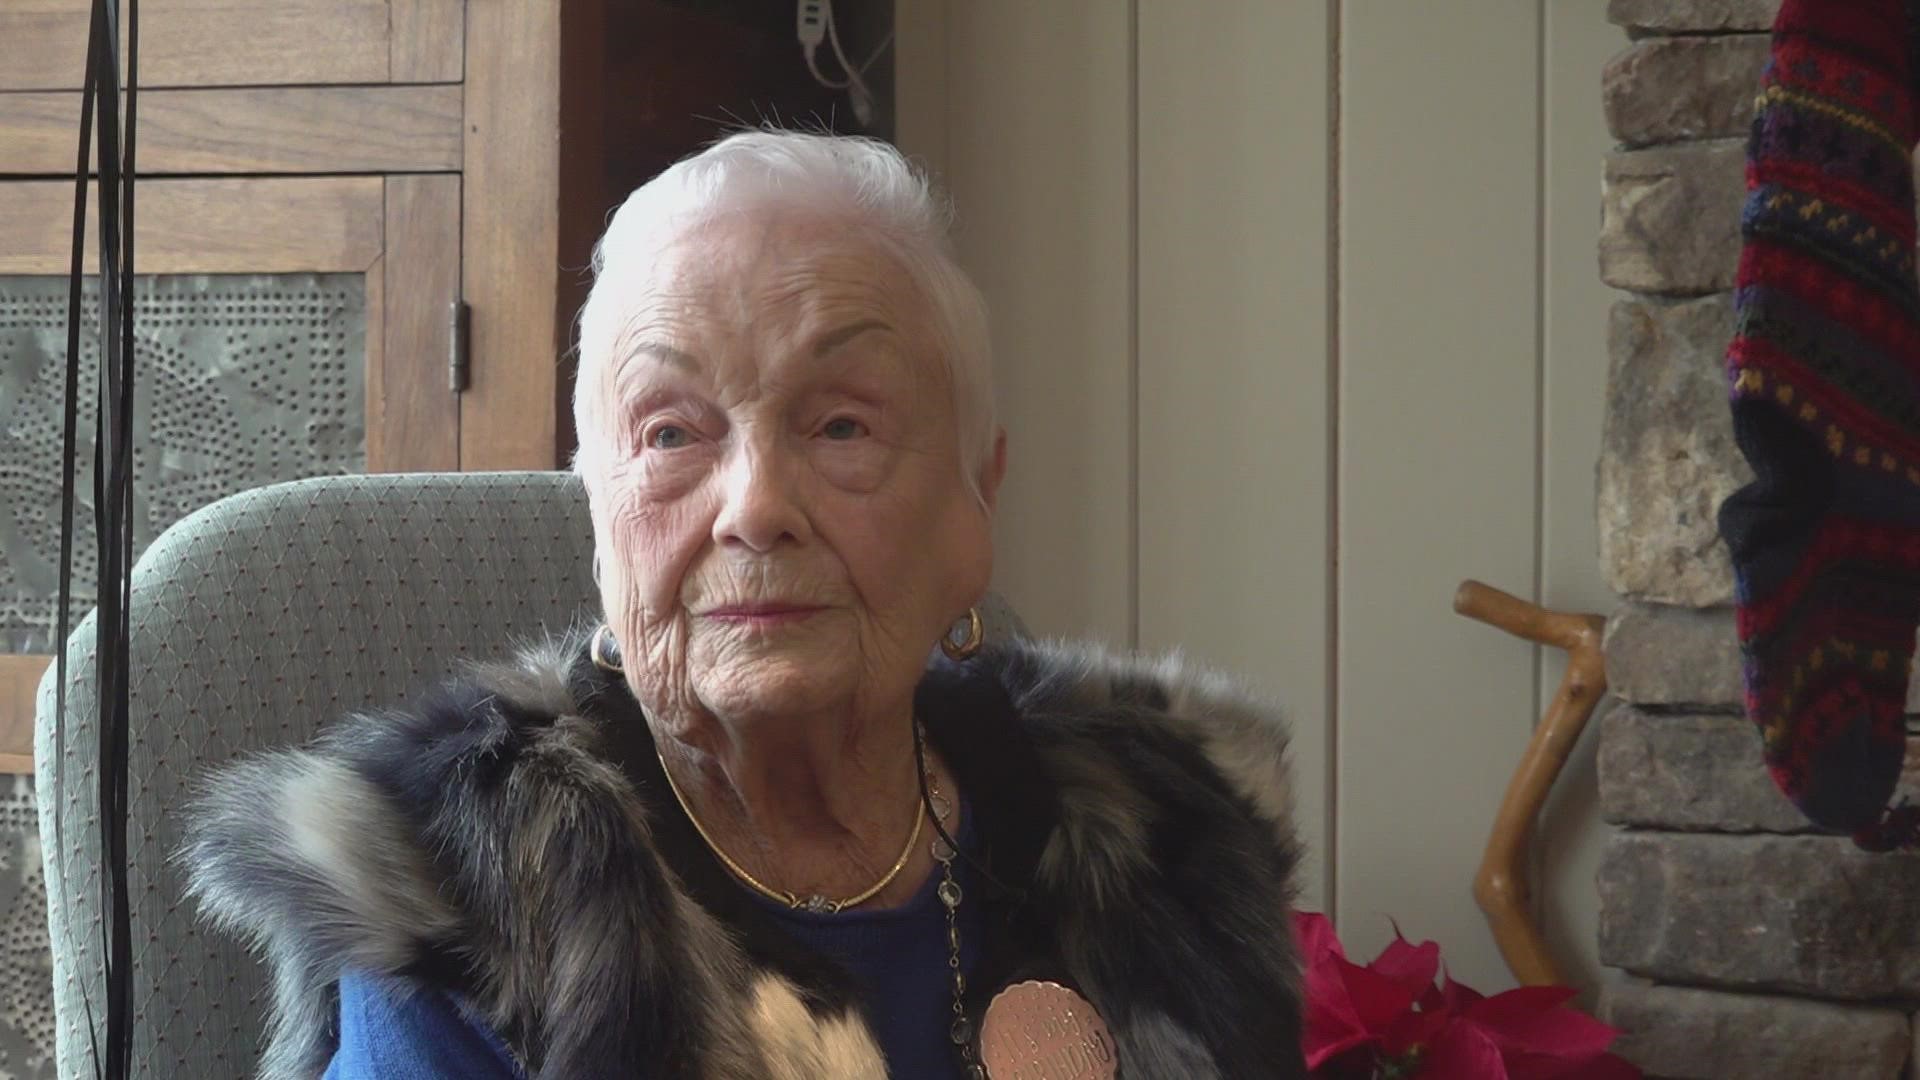 Helen Acker recently celebrated the milestone of turning 105! A neighbor threw her a birthday party and she got the chance to celebrate with everyone.